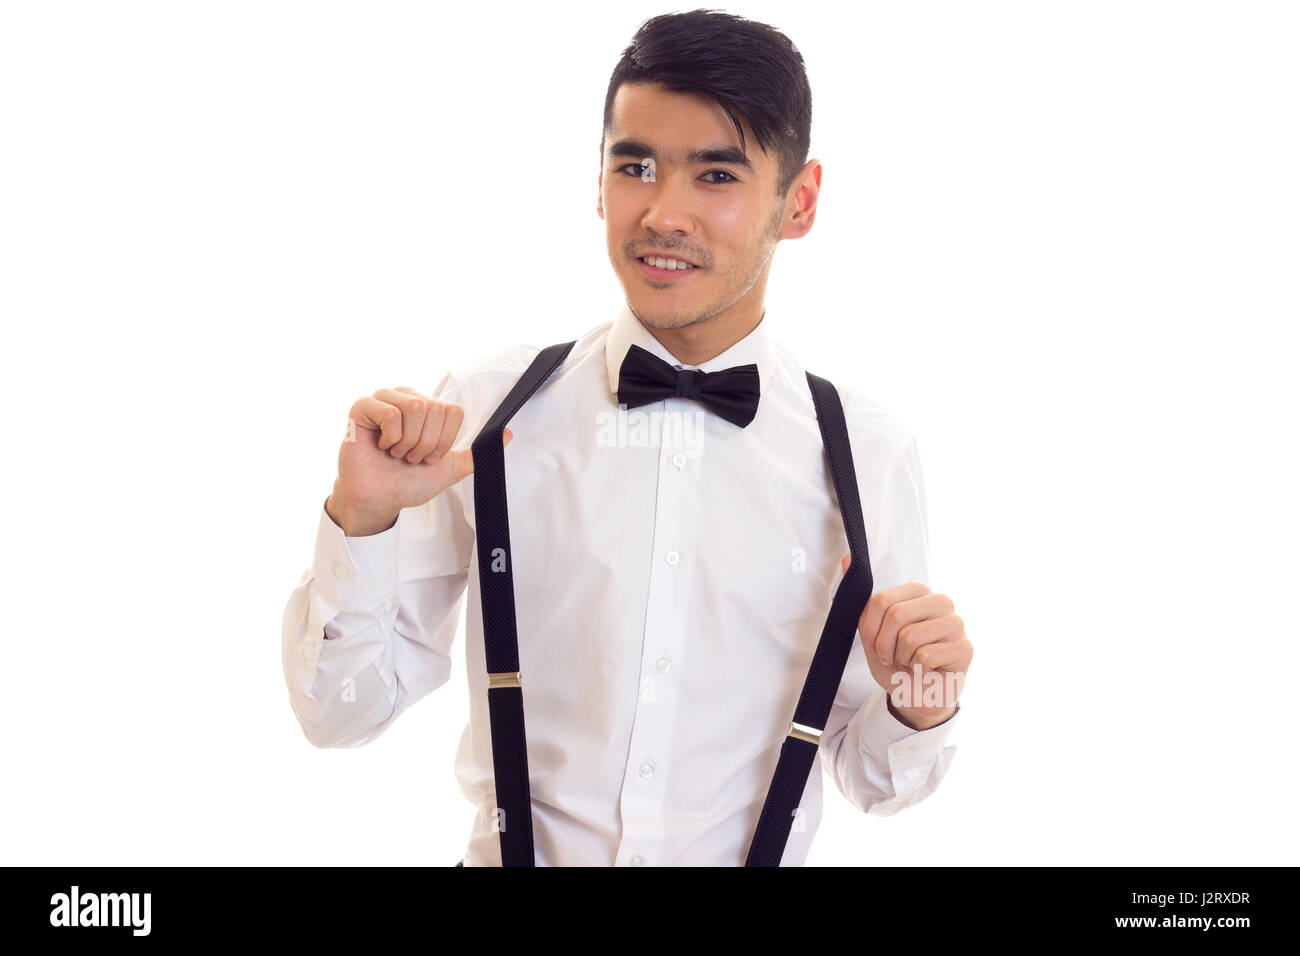 Young man with bow-tie and suspenders Stock Photo